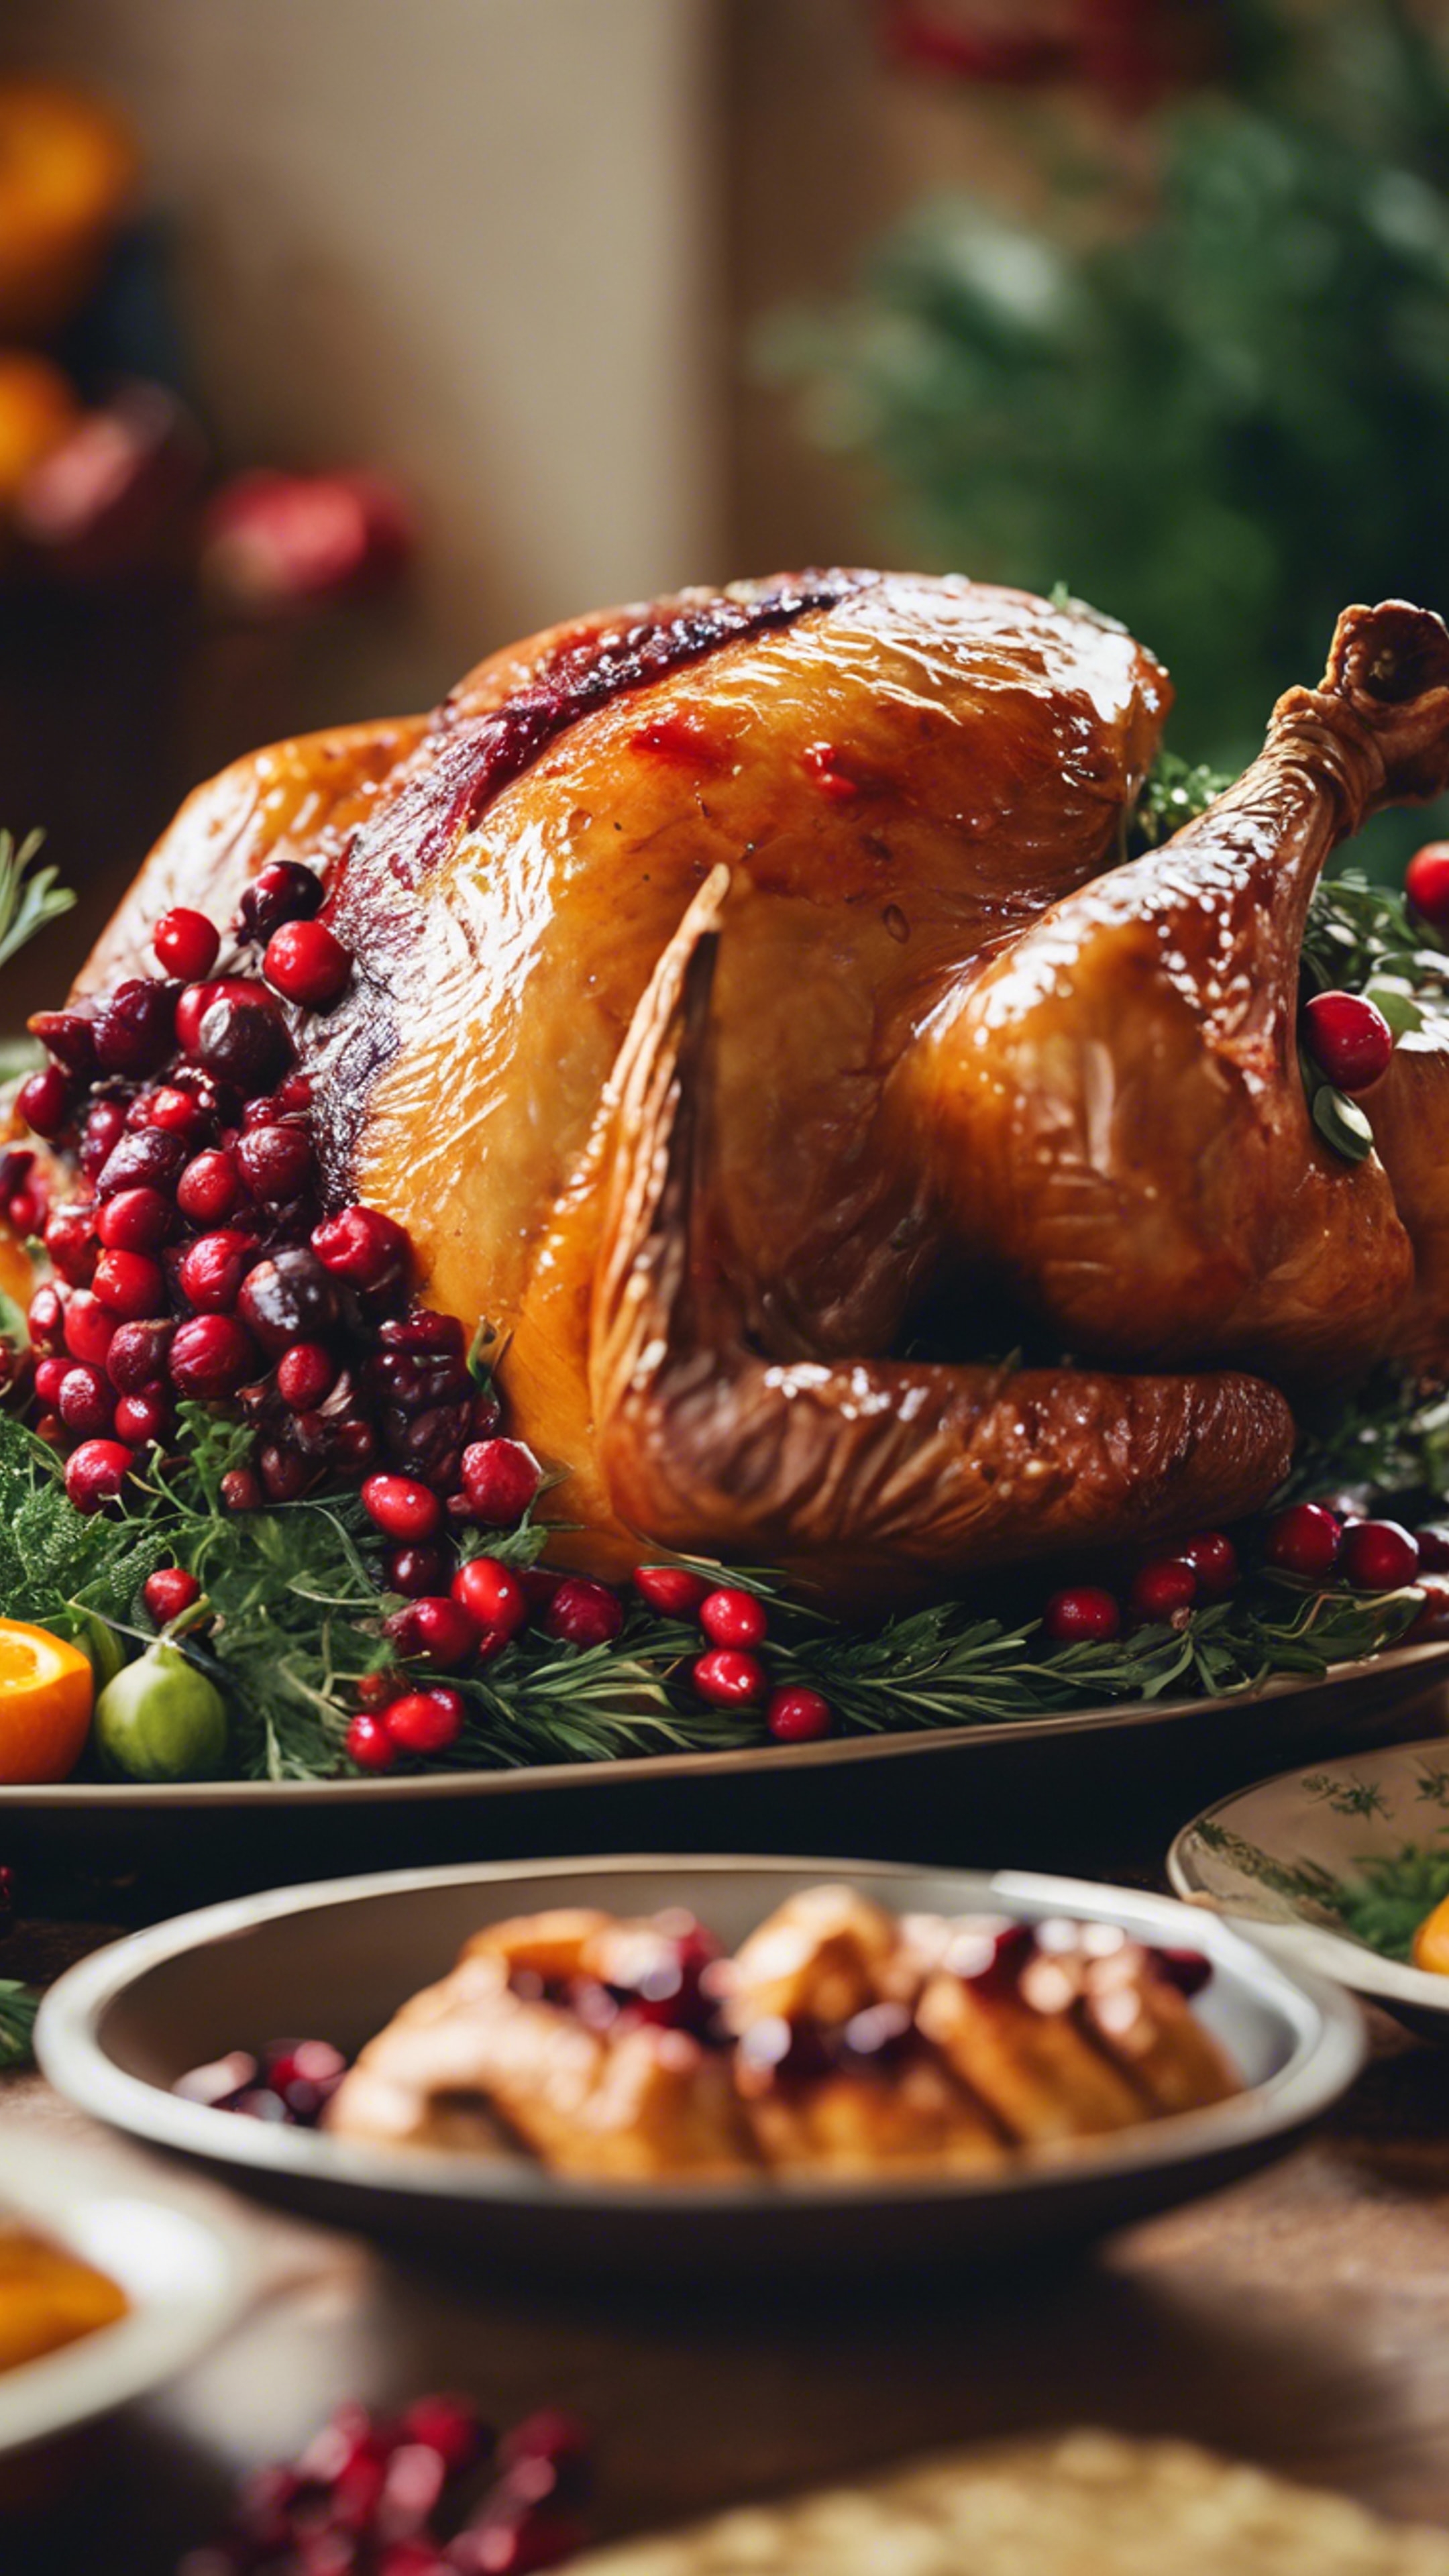 An artistic close-up of a traditional roast turkey on a Thanksgiving table, garnished with cranberries and herbs. Papel de parede[f7ada081b7d5471b890d]